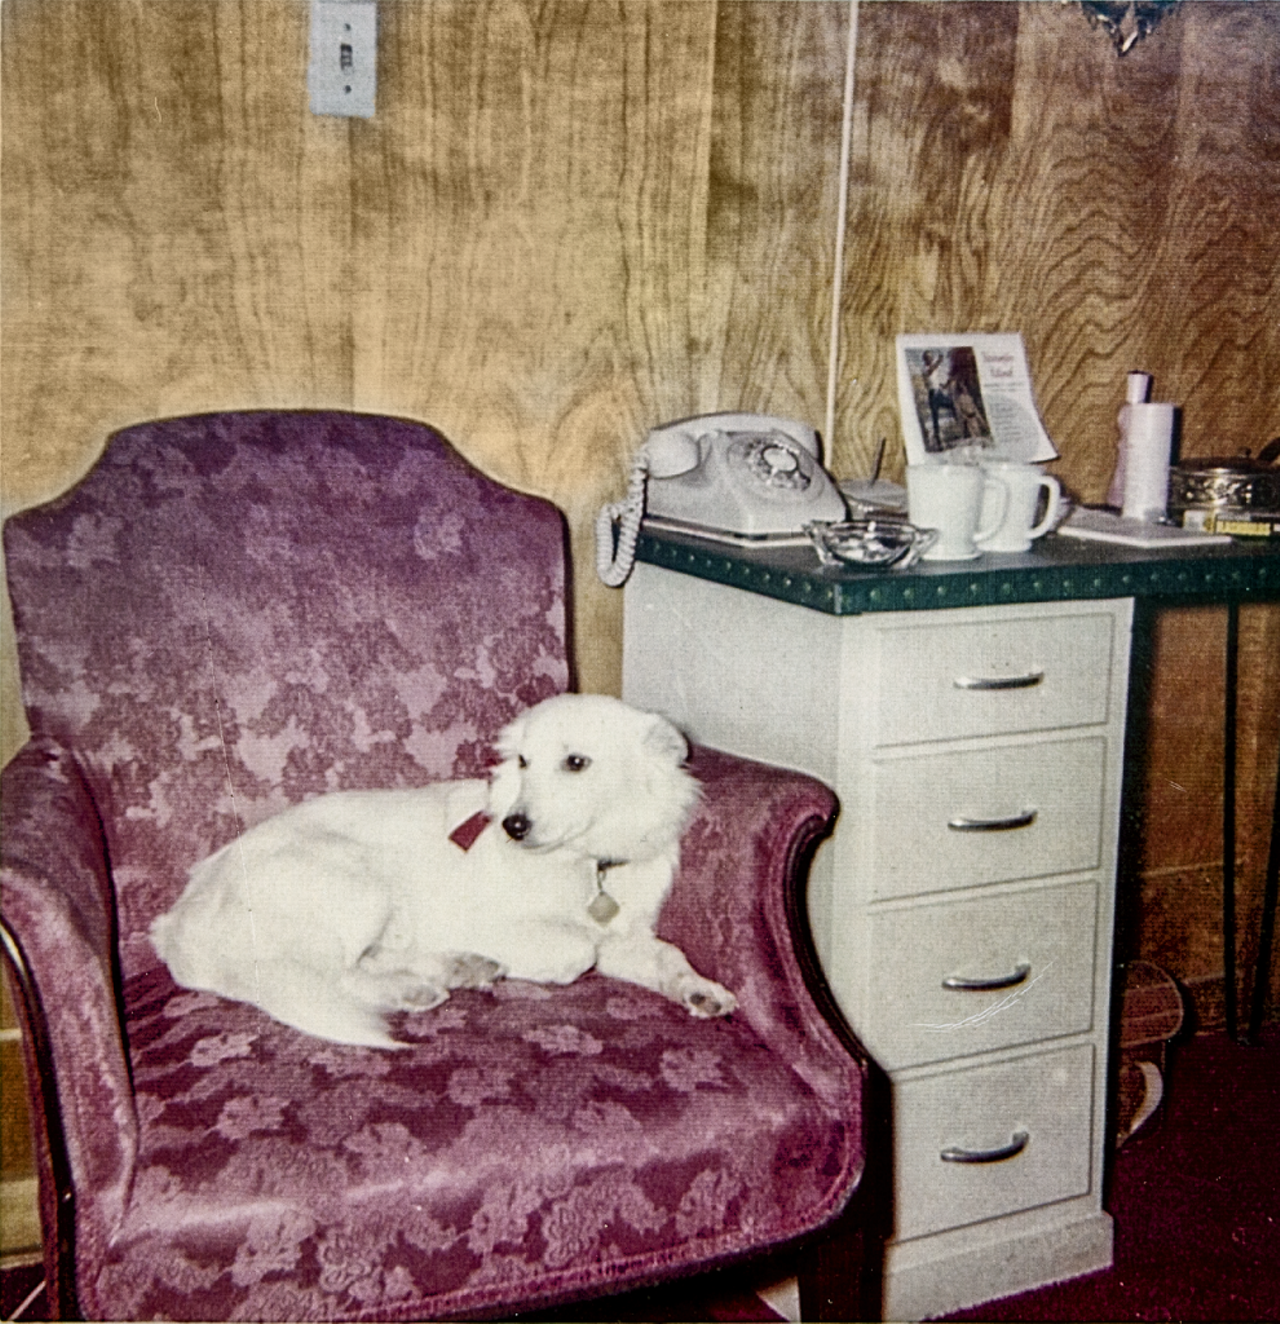 Trixie was abandoned by her owners near the Chicken Ranch. The women took the pup in and made her an unofficial mascot. Courtesy of Edna Milton Chadwell